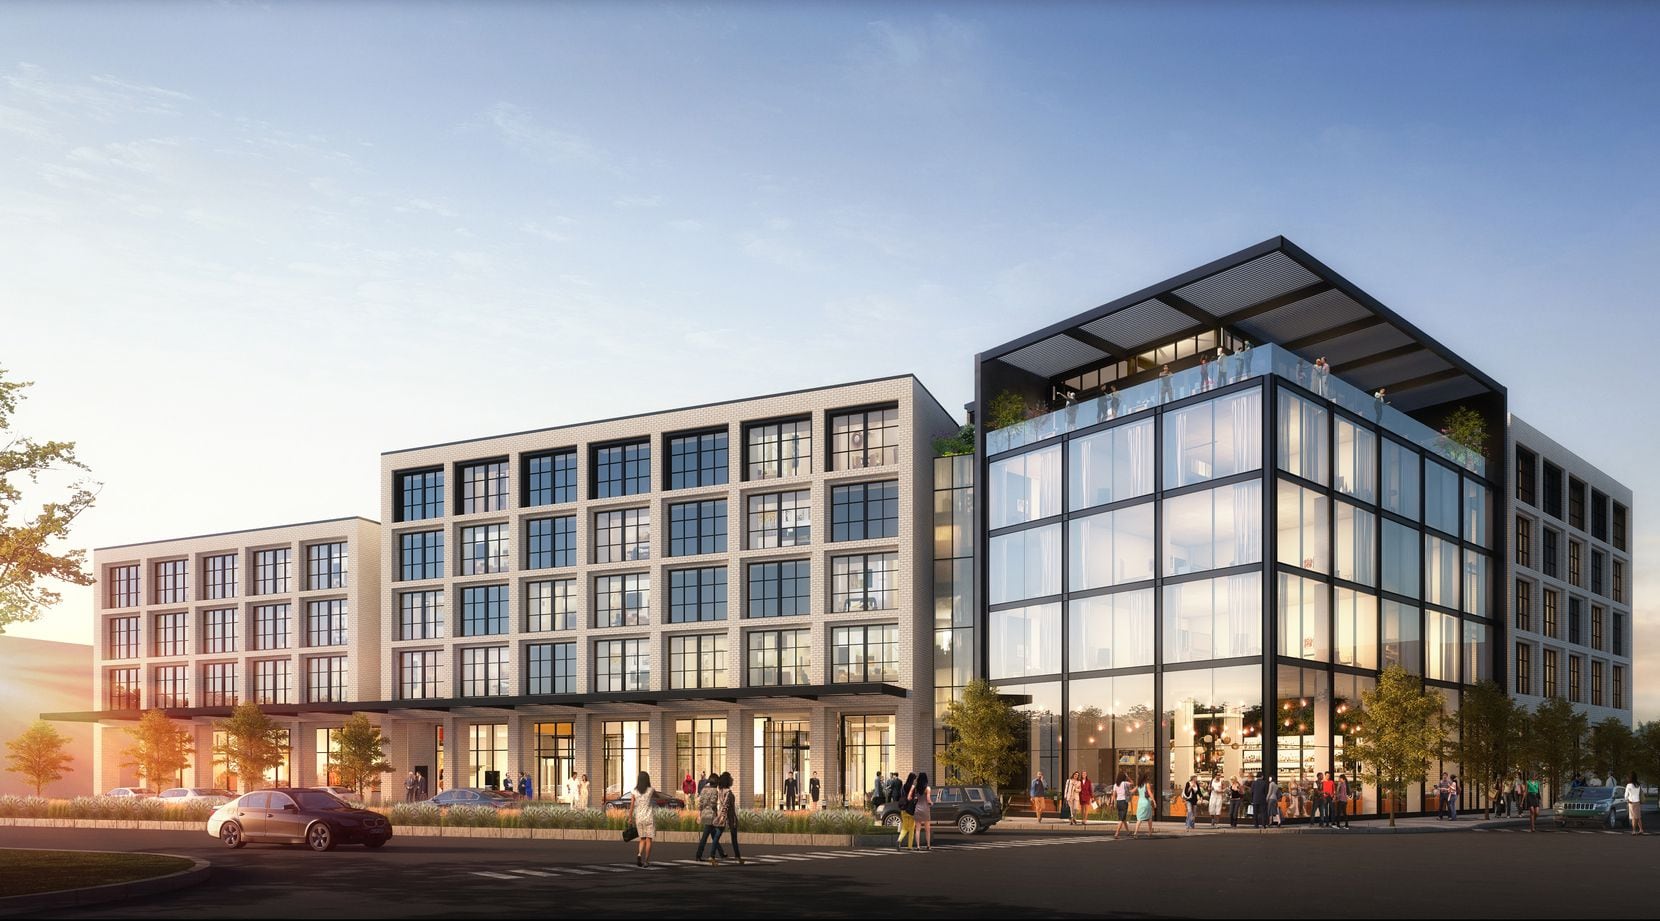 The project will include a 200-room boutique hotel.